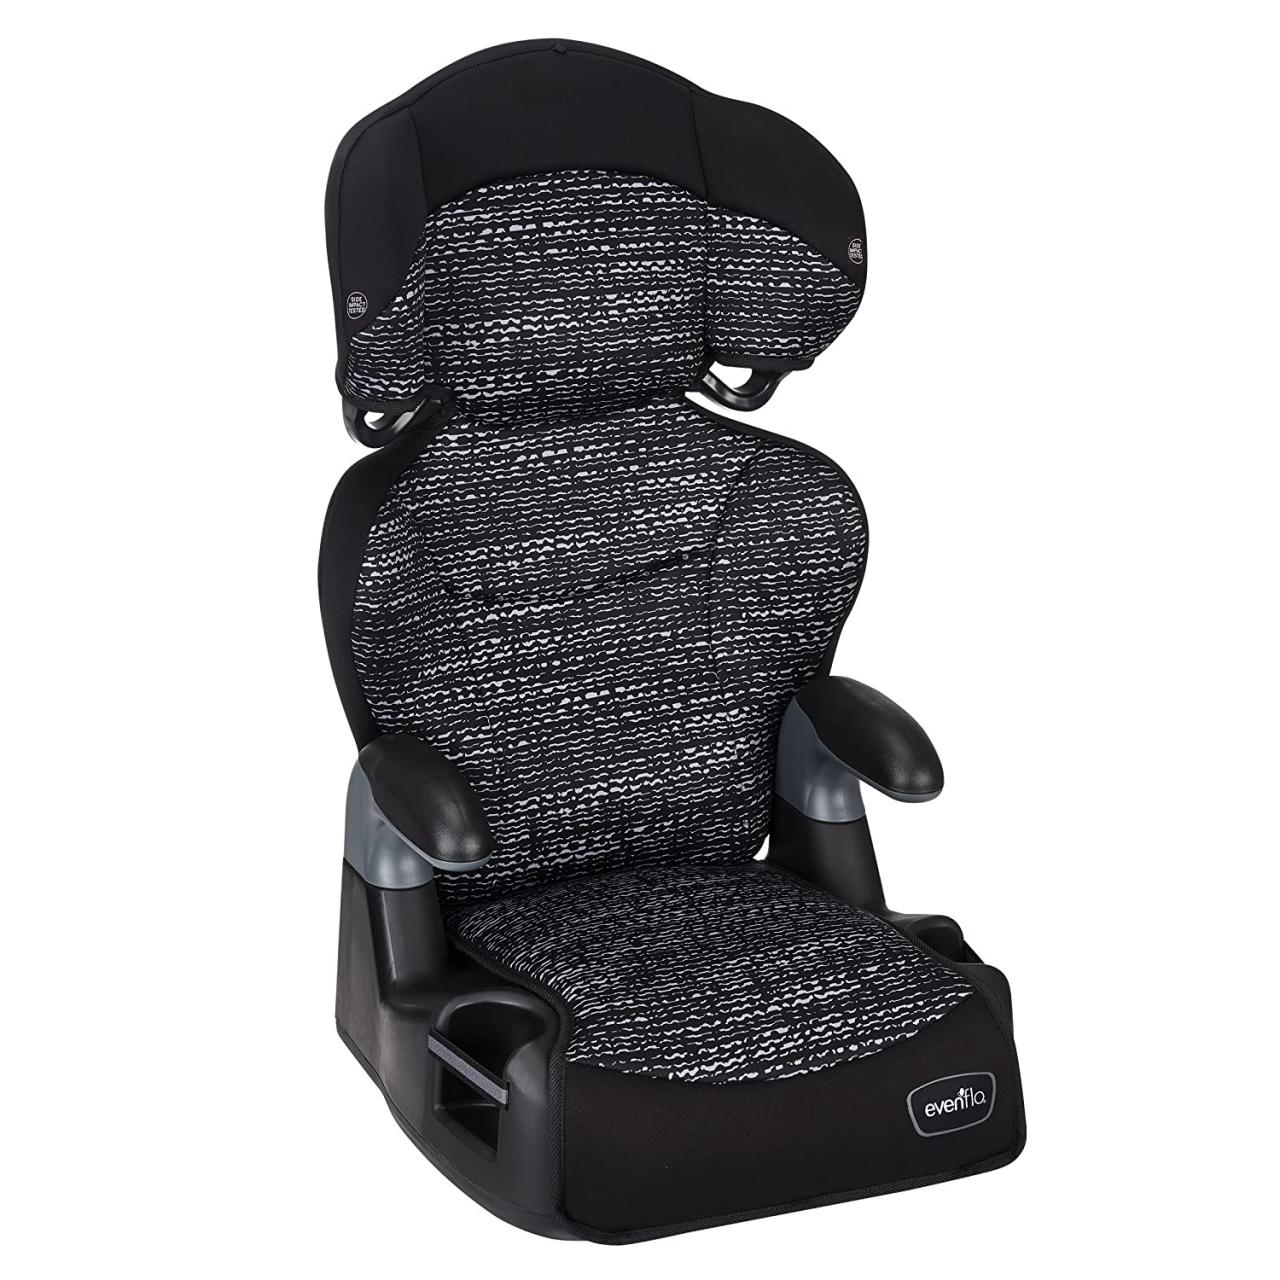 Evenflo Big Kid Booster Seat - Ratings and Review